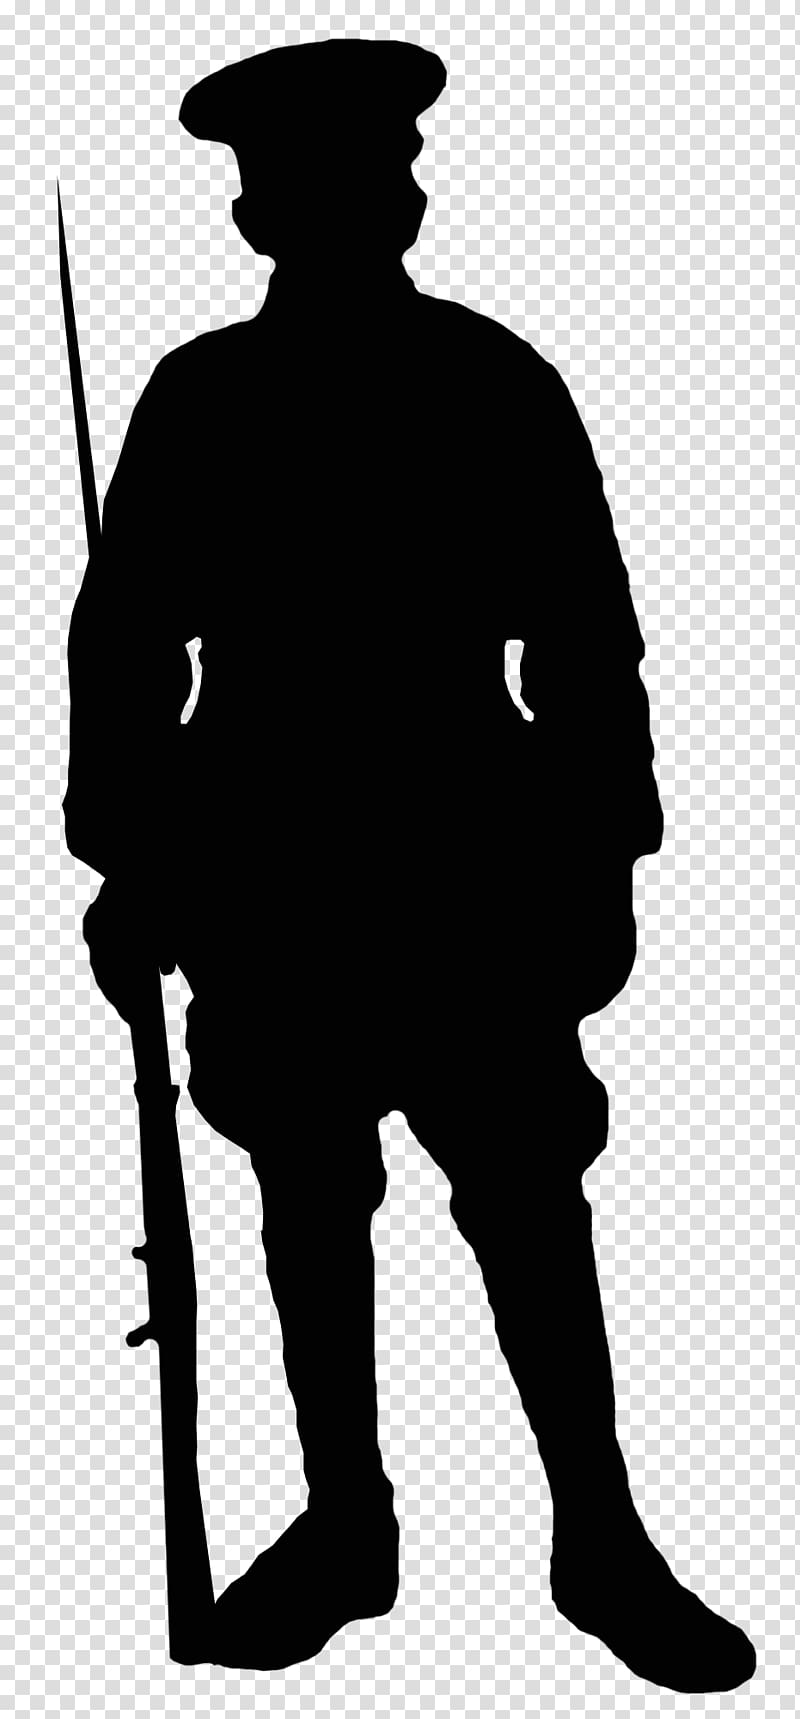 First World War Silhouette Soldier Military, Silhouette transparent background PNG clipart